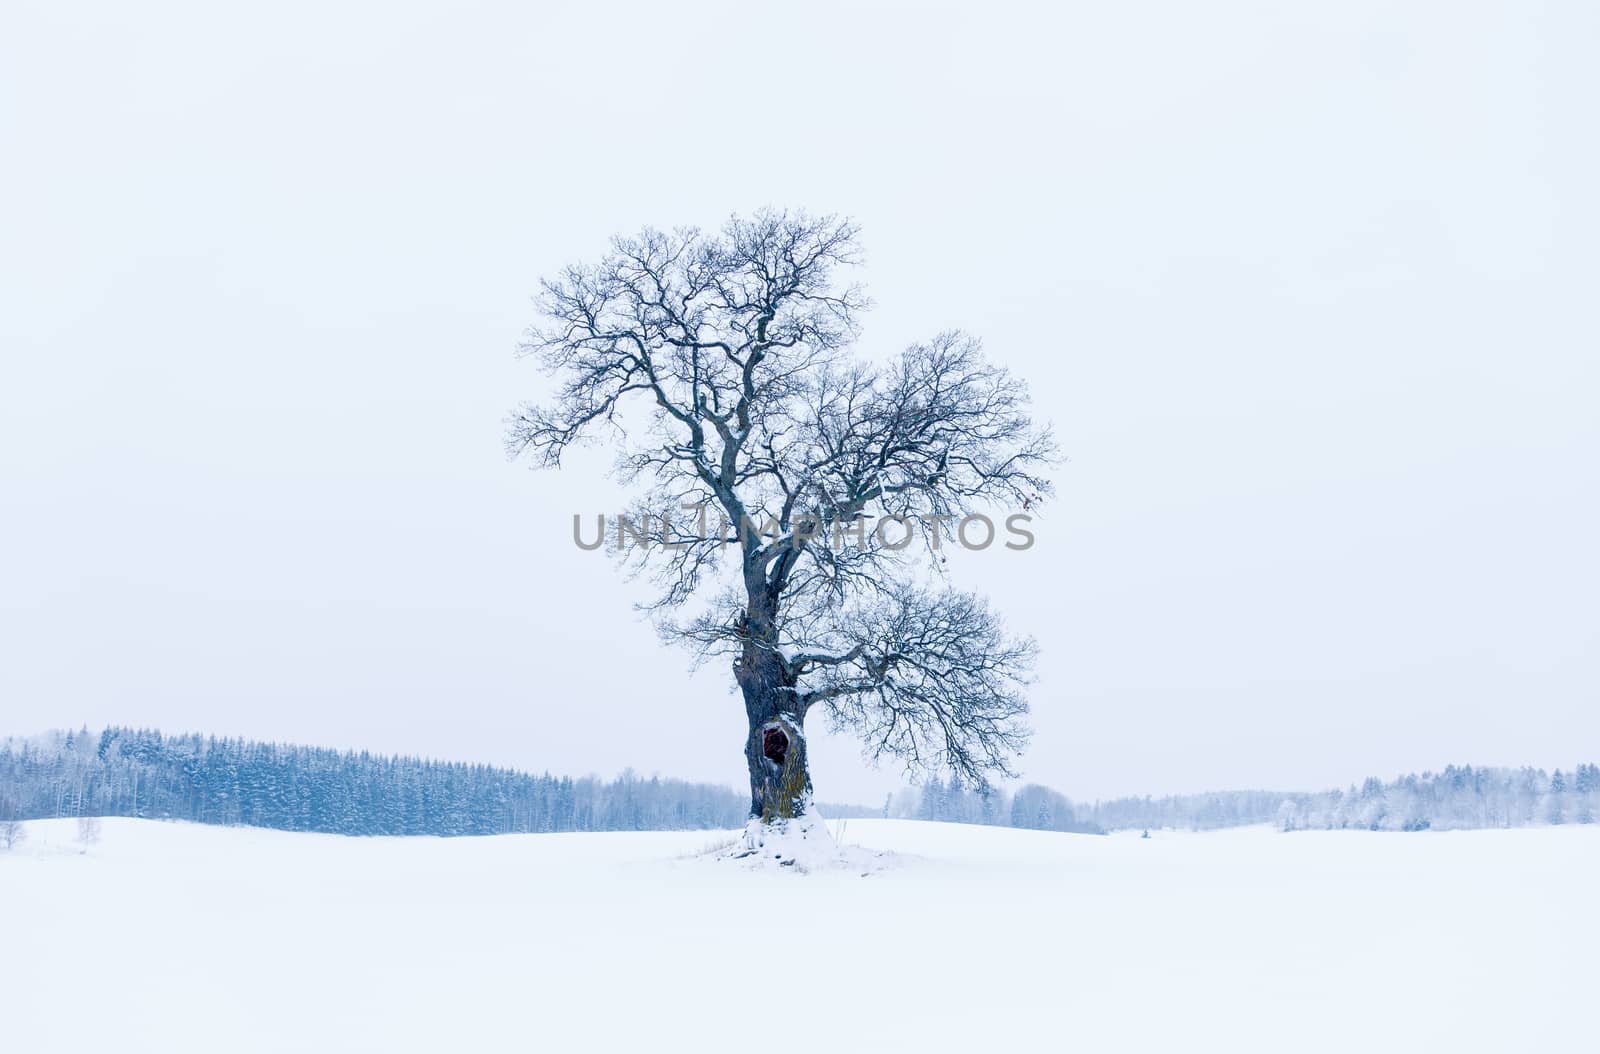 Tree in winter by thomas_males